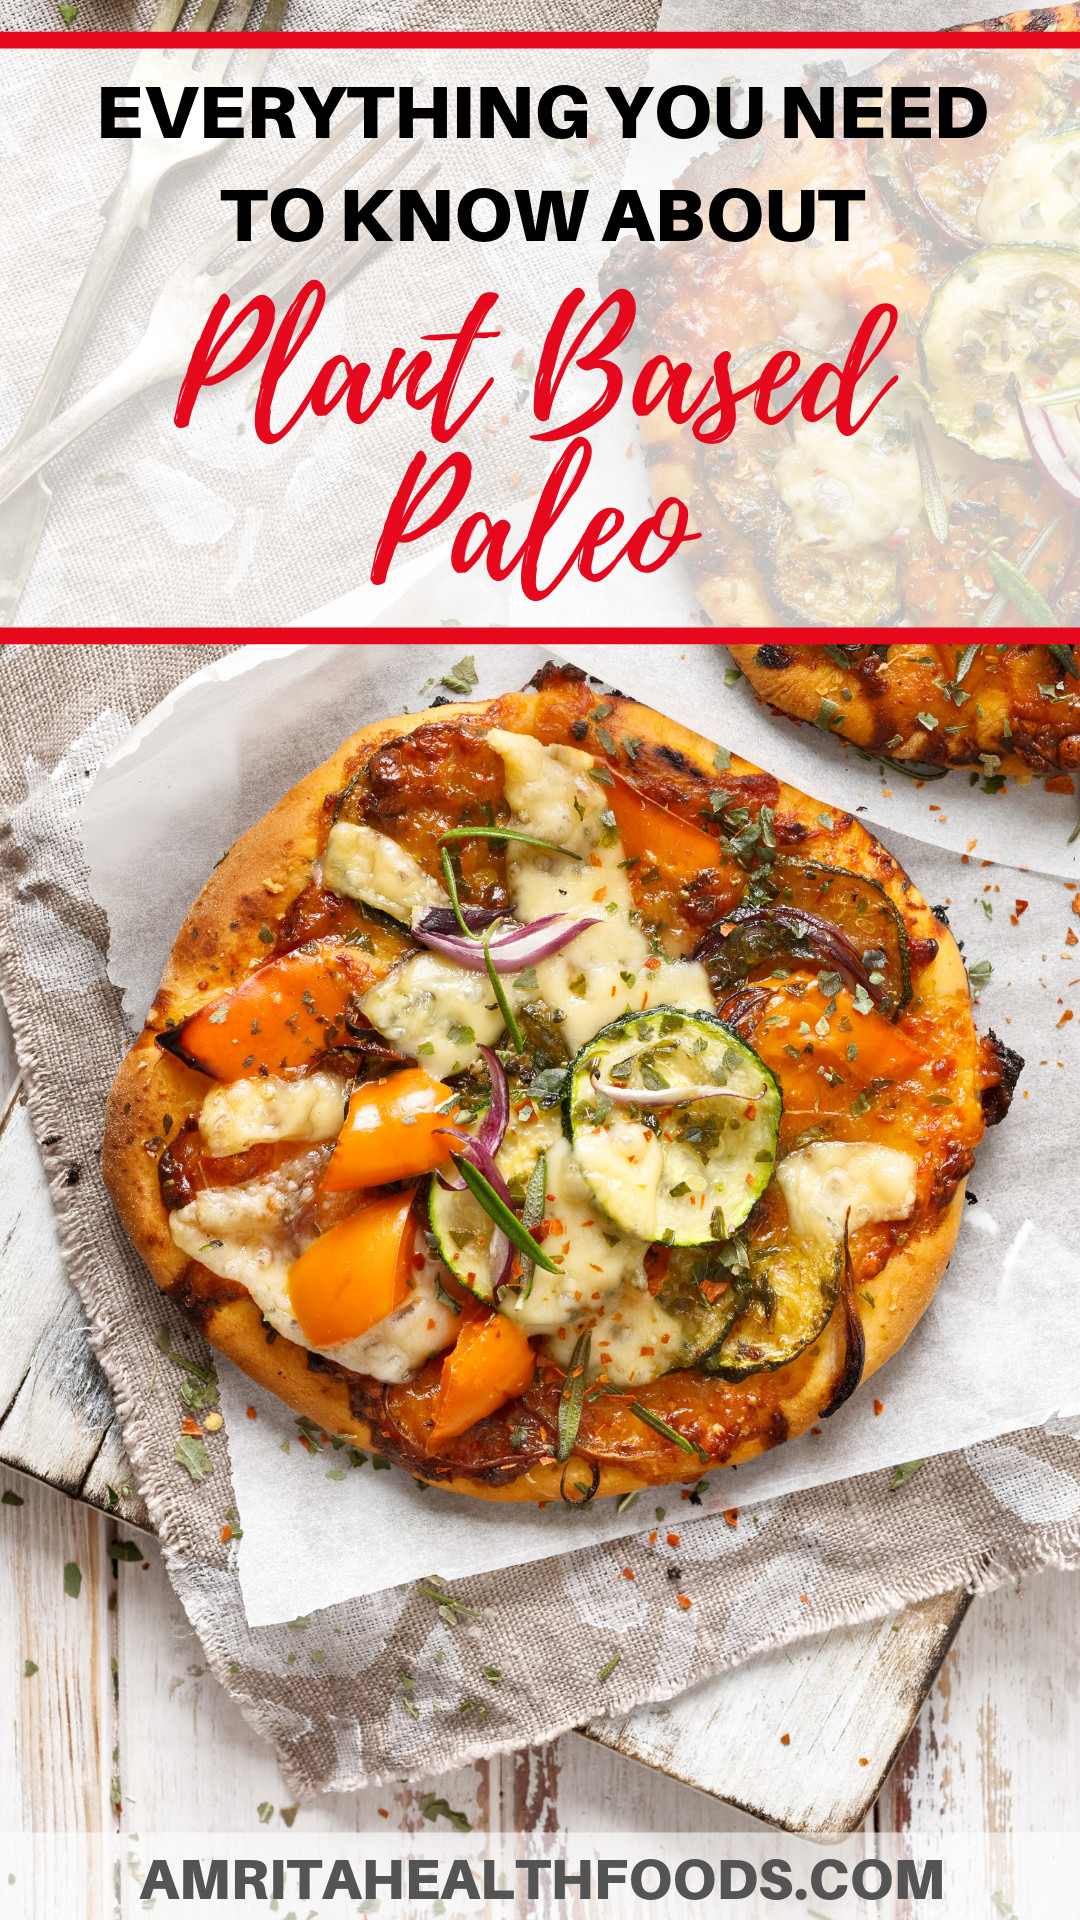 Paleo Plant Based Recipes
 Everything You Need to Know About a Plant Based Paleo Diet